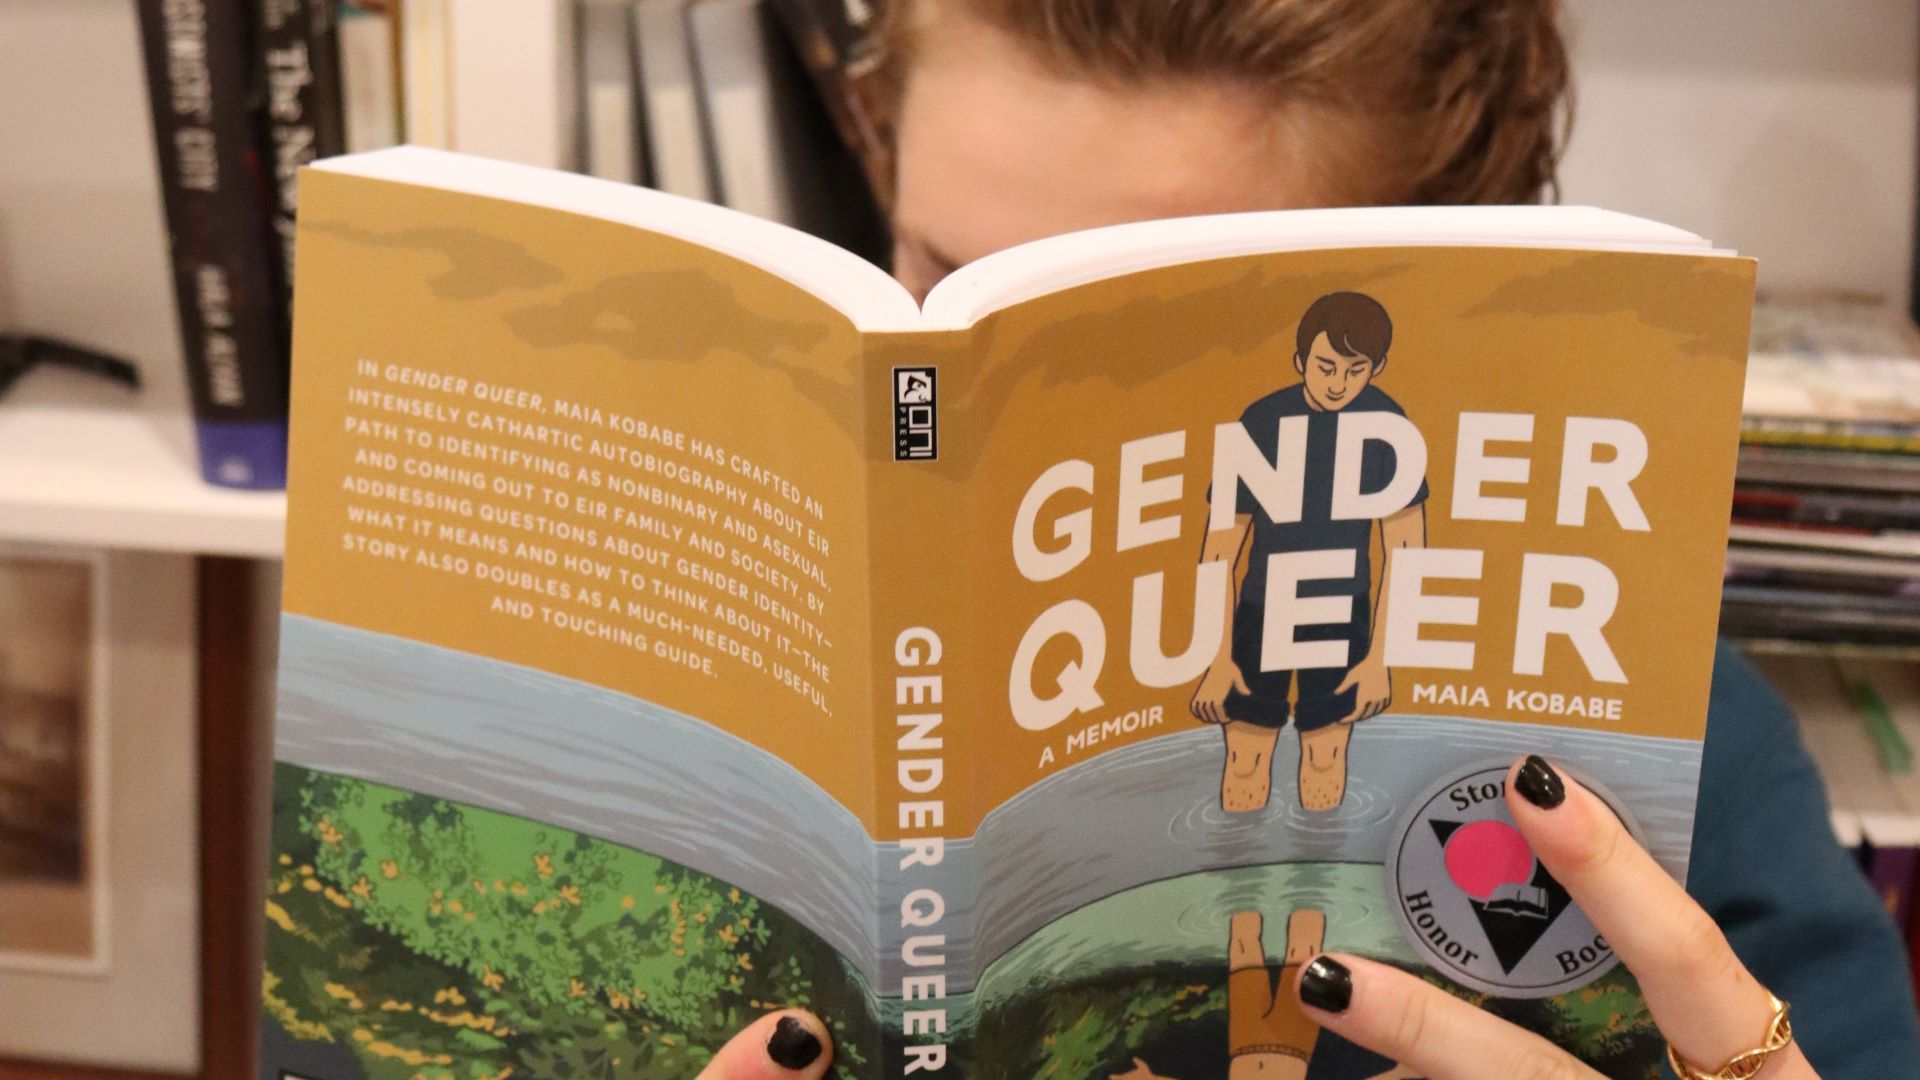 A note about Gender Queer: a memoir